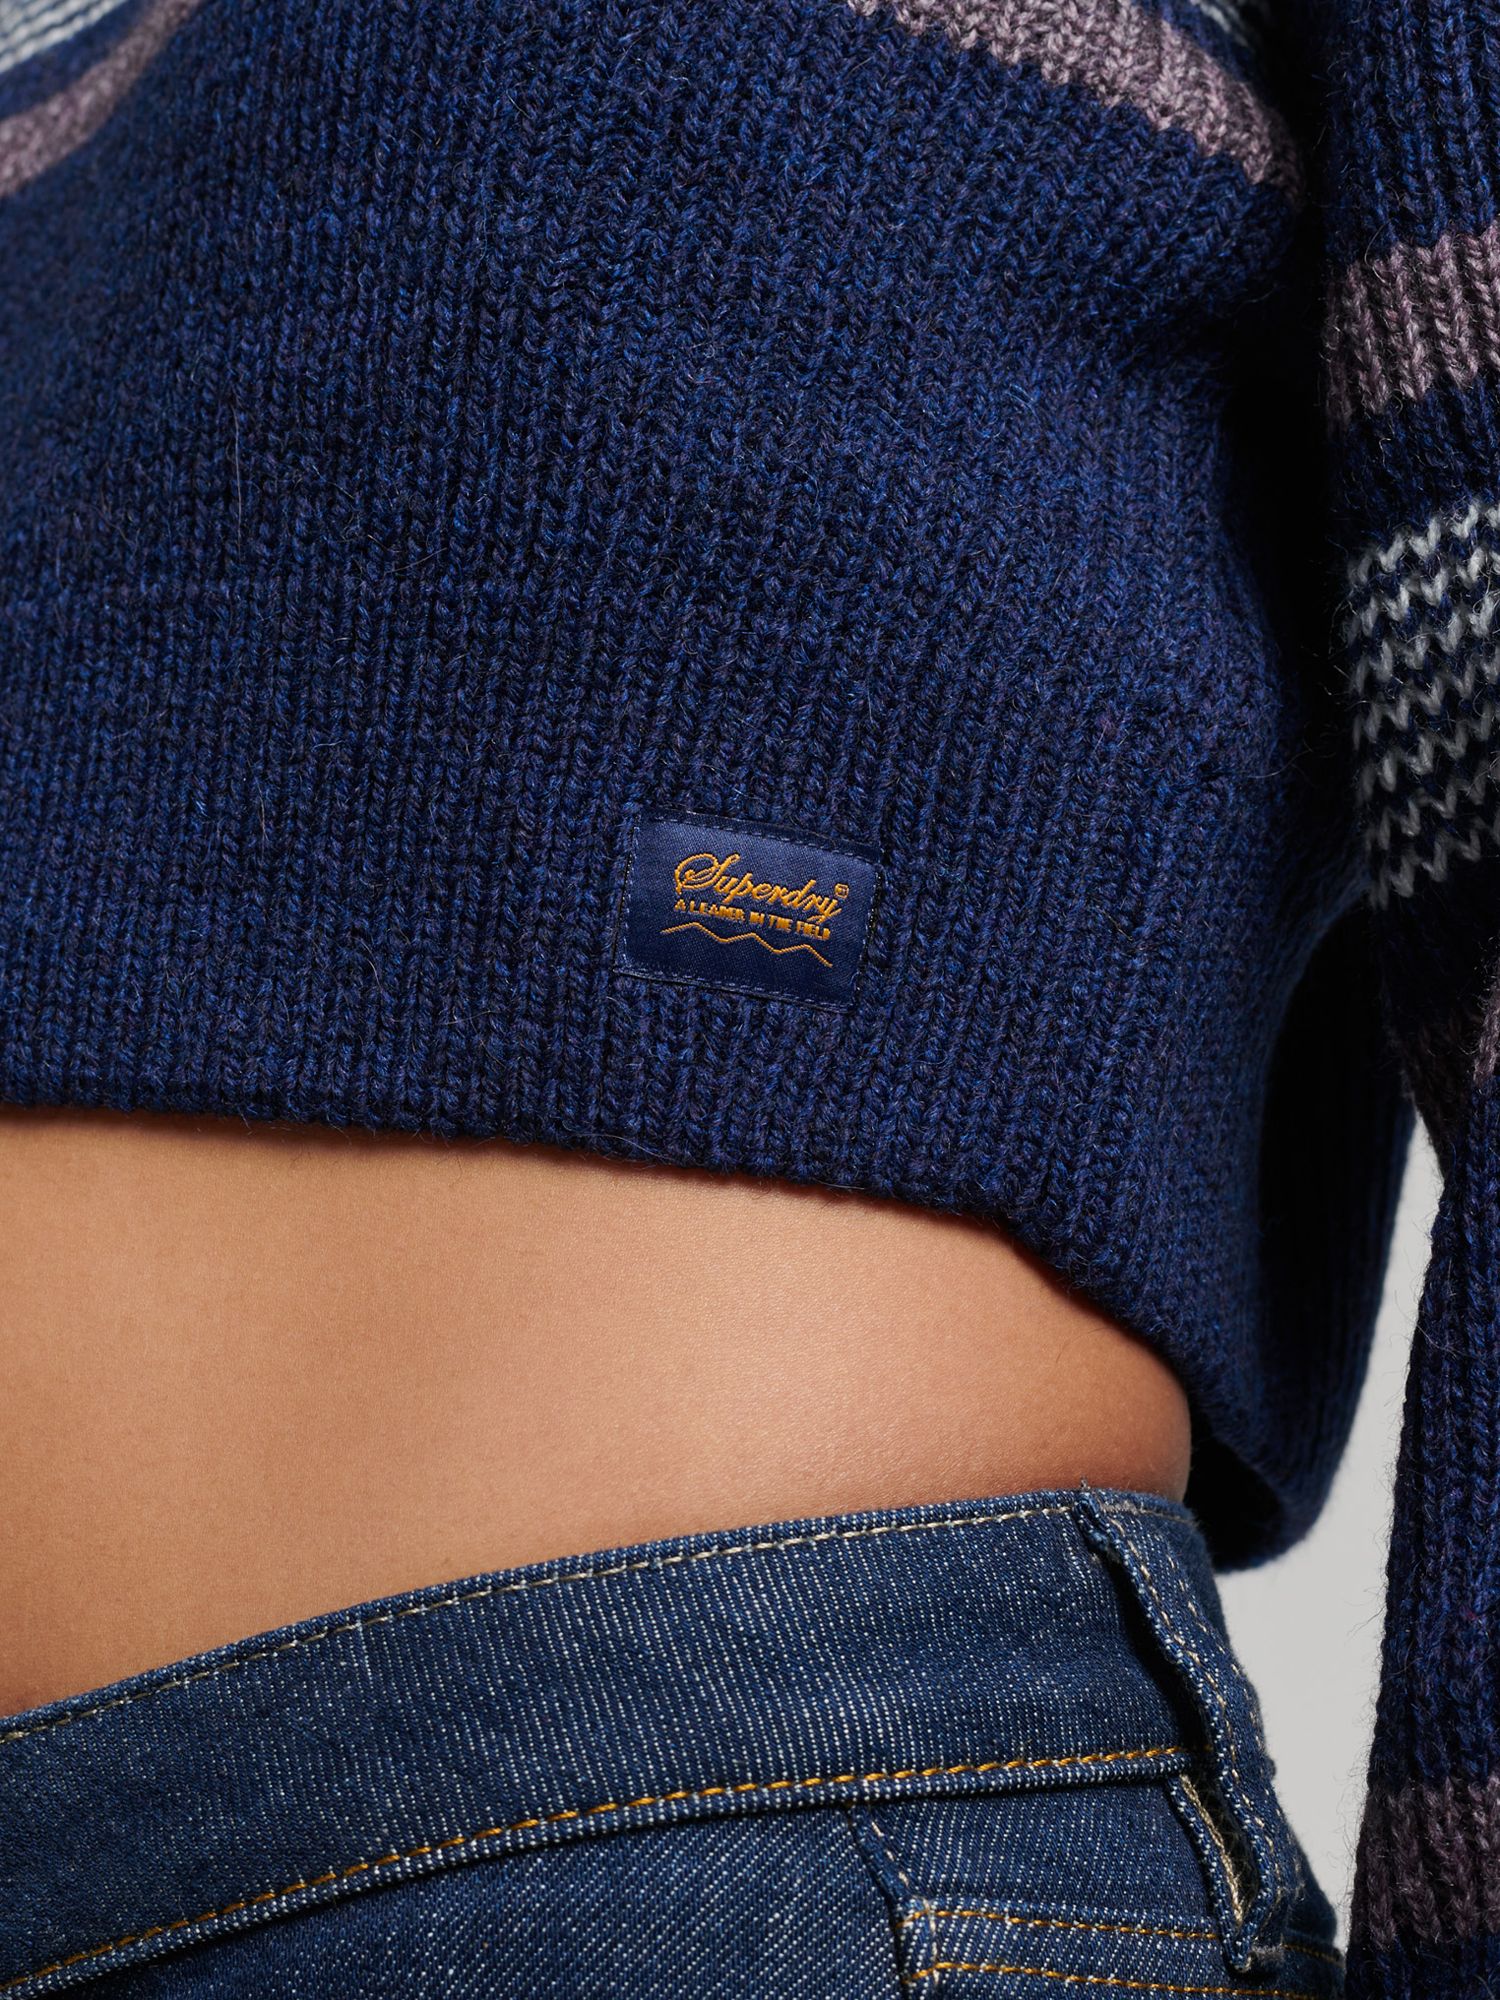 Buy Superdry Cropped Classic Crew Jumper Online at johnlewis.com